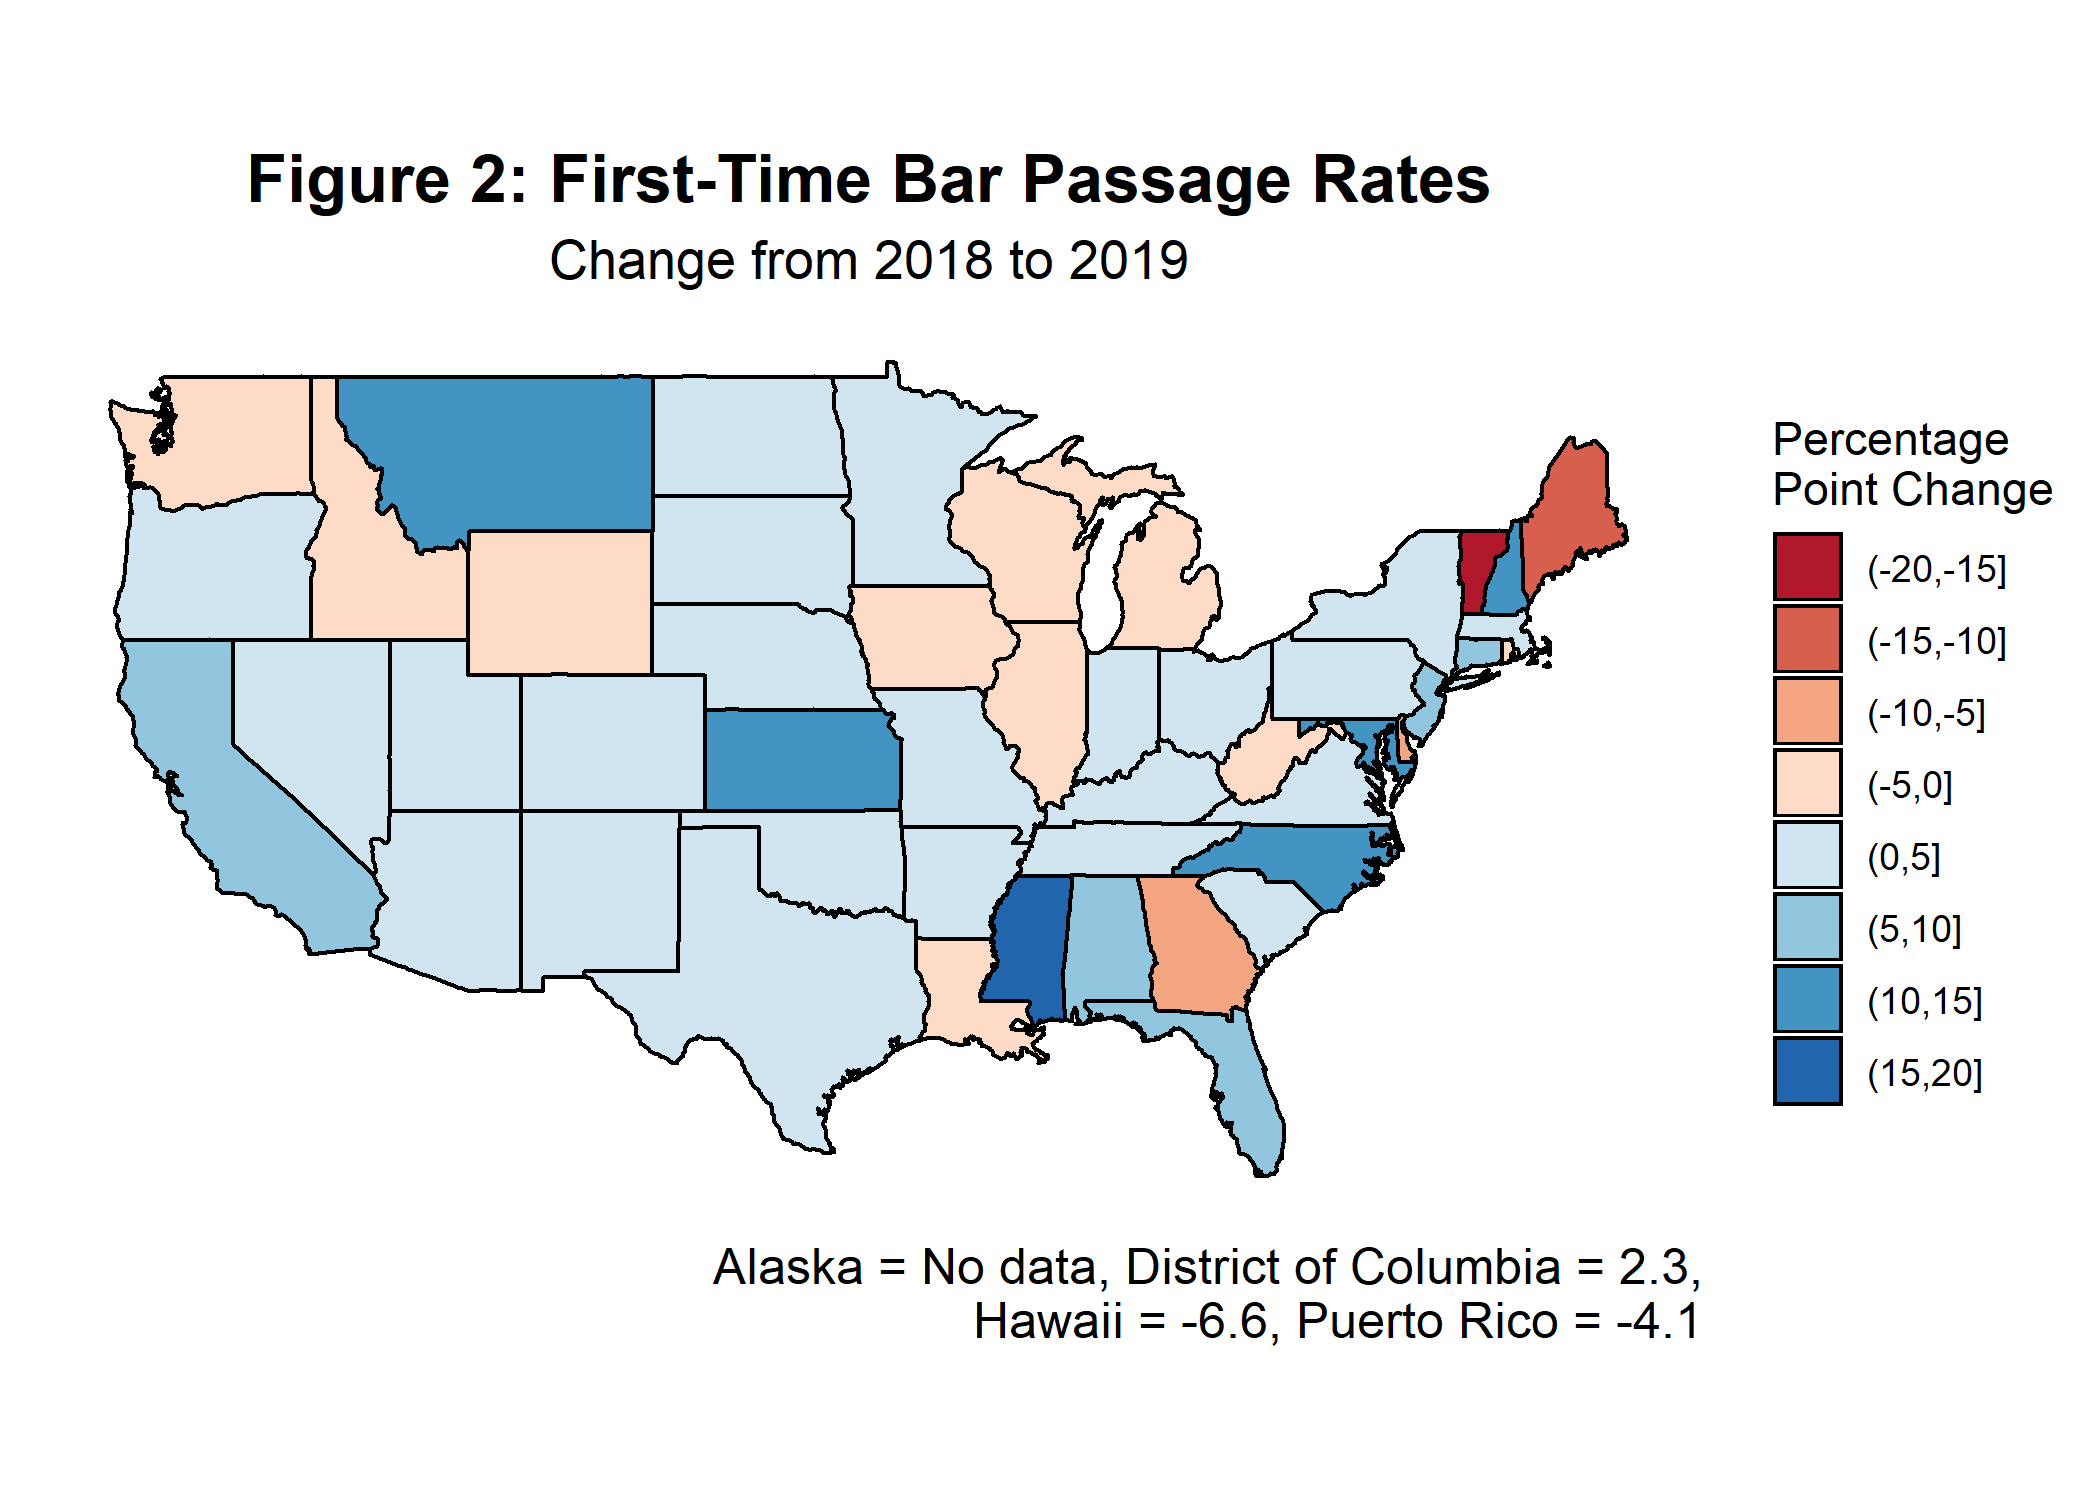 First-Time Bar Passage Rate - Change from 2018 to 2019